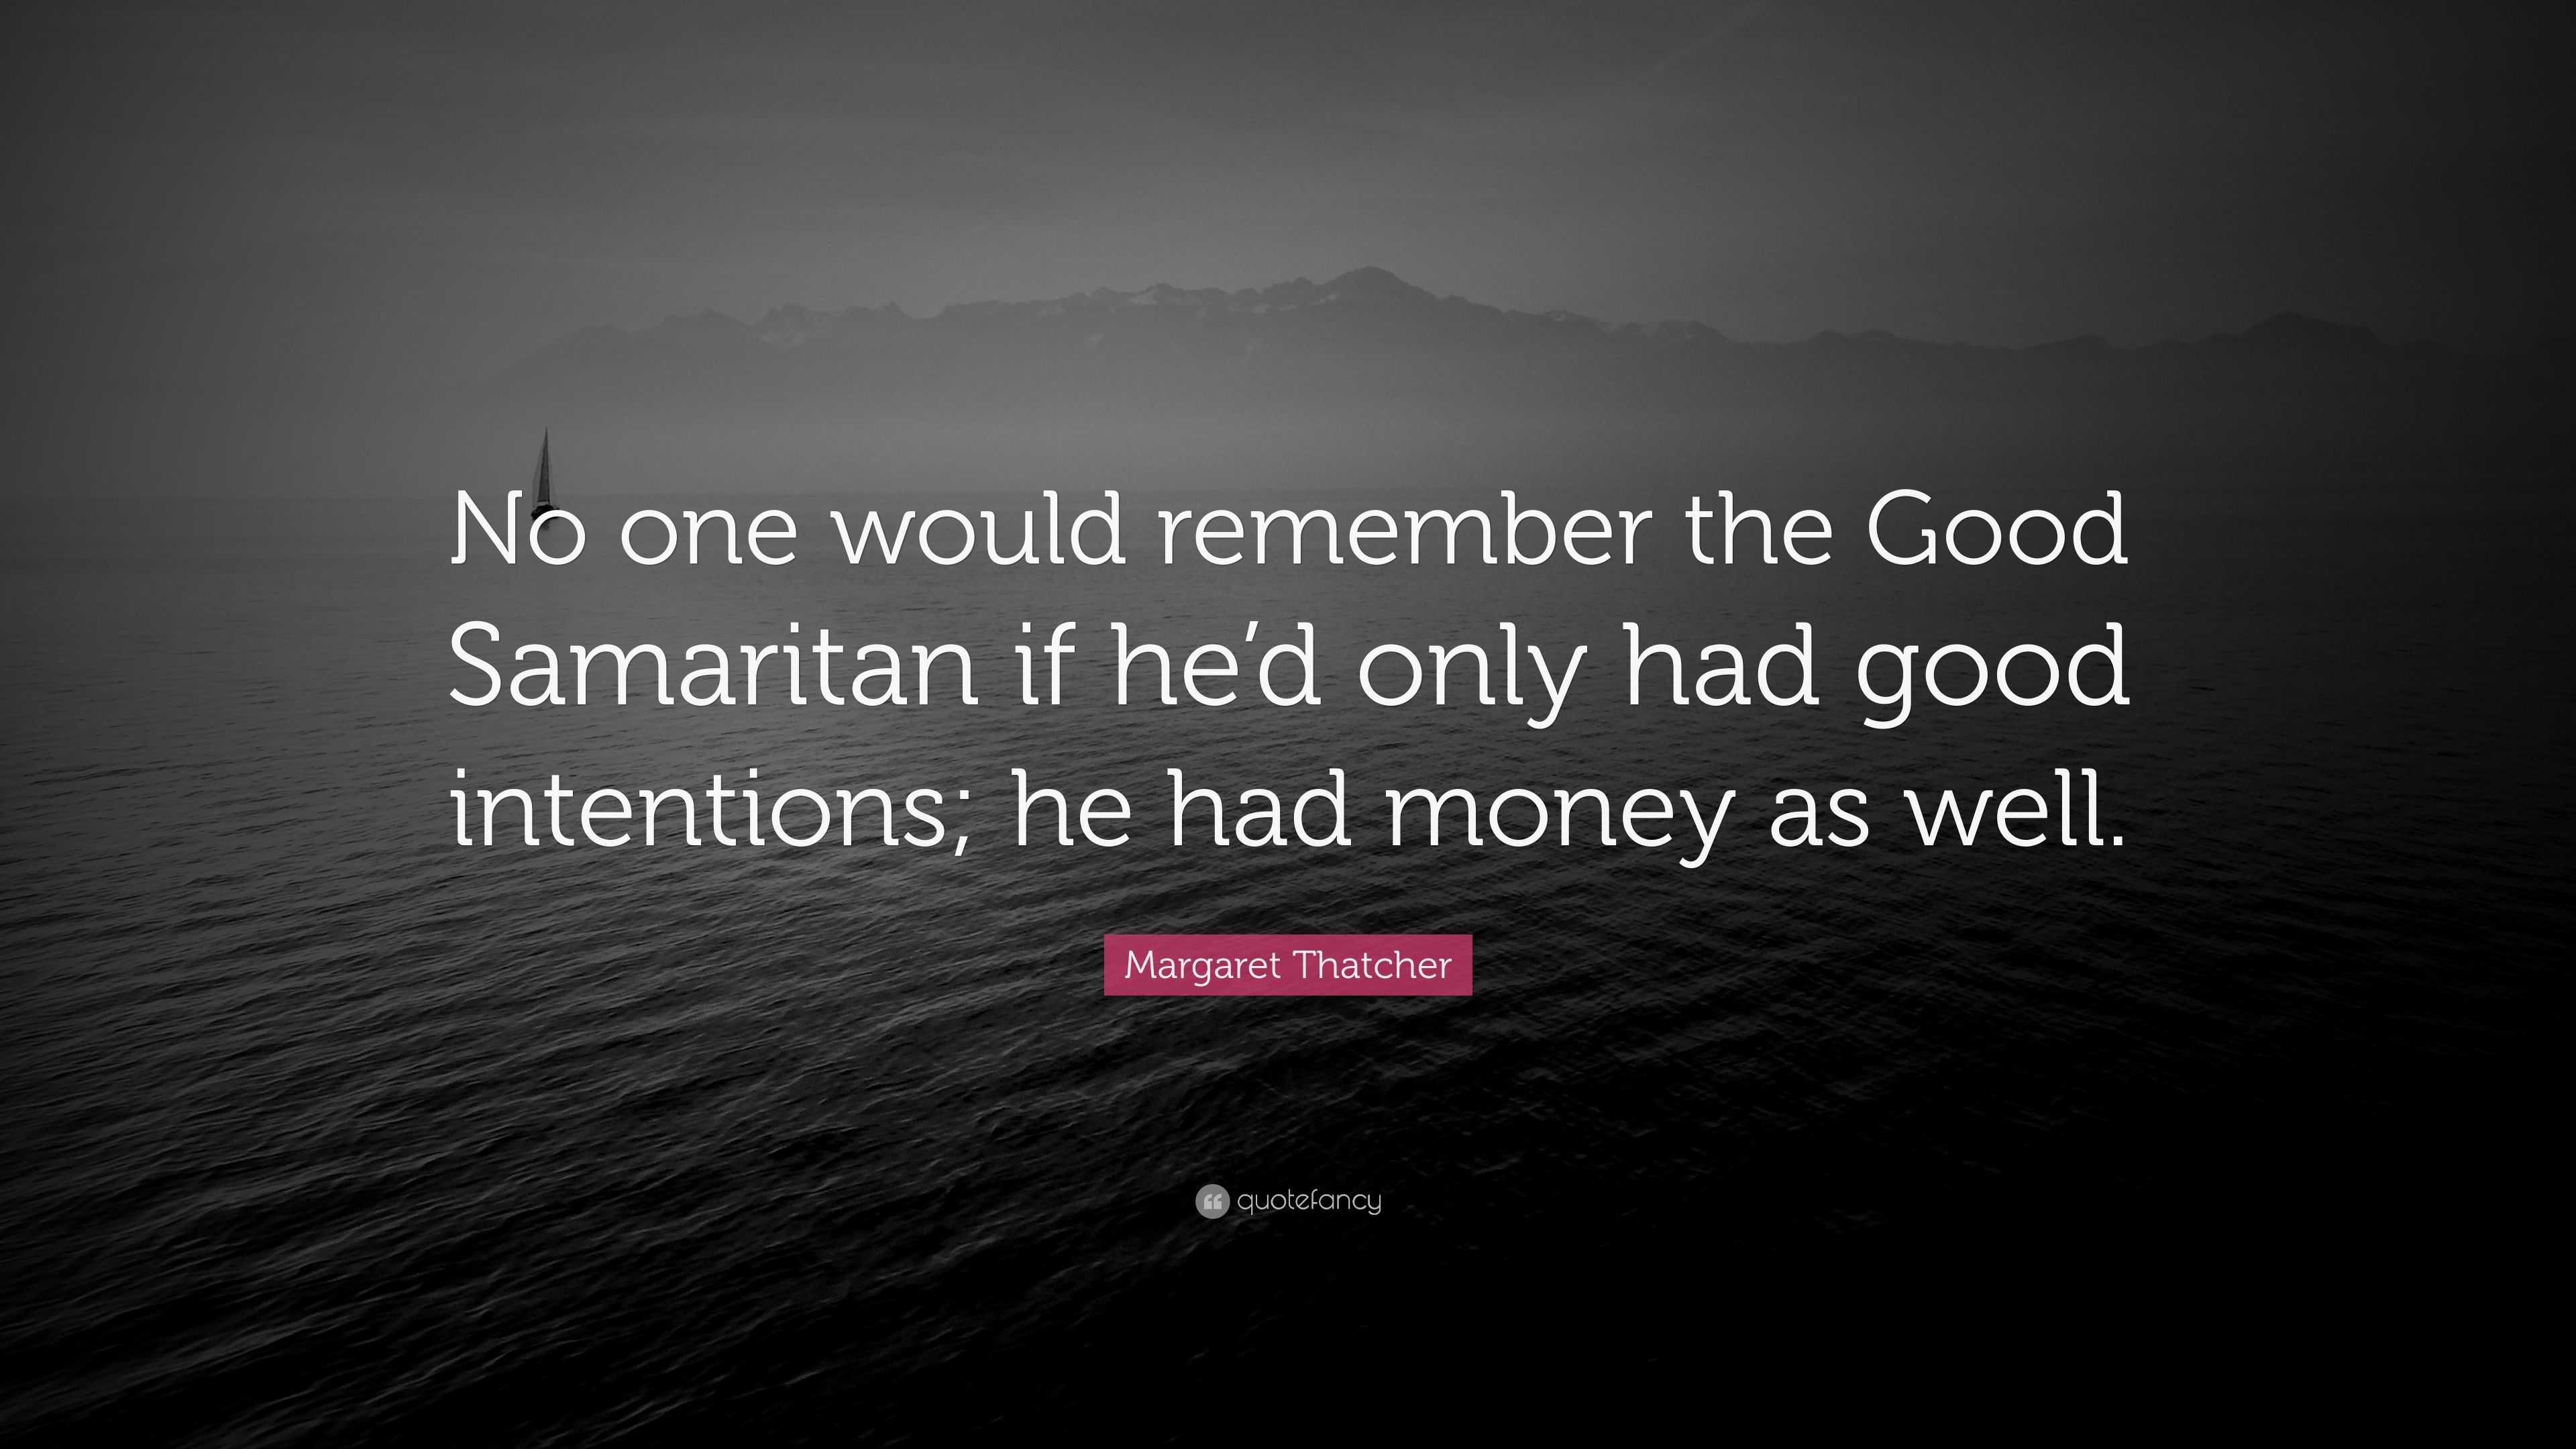 Margaret Thatcher Quote “No one would remember the Good